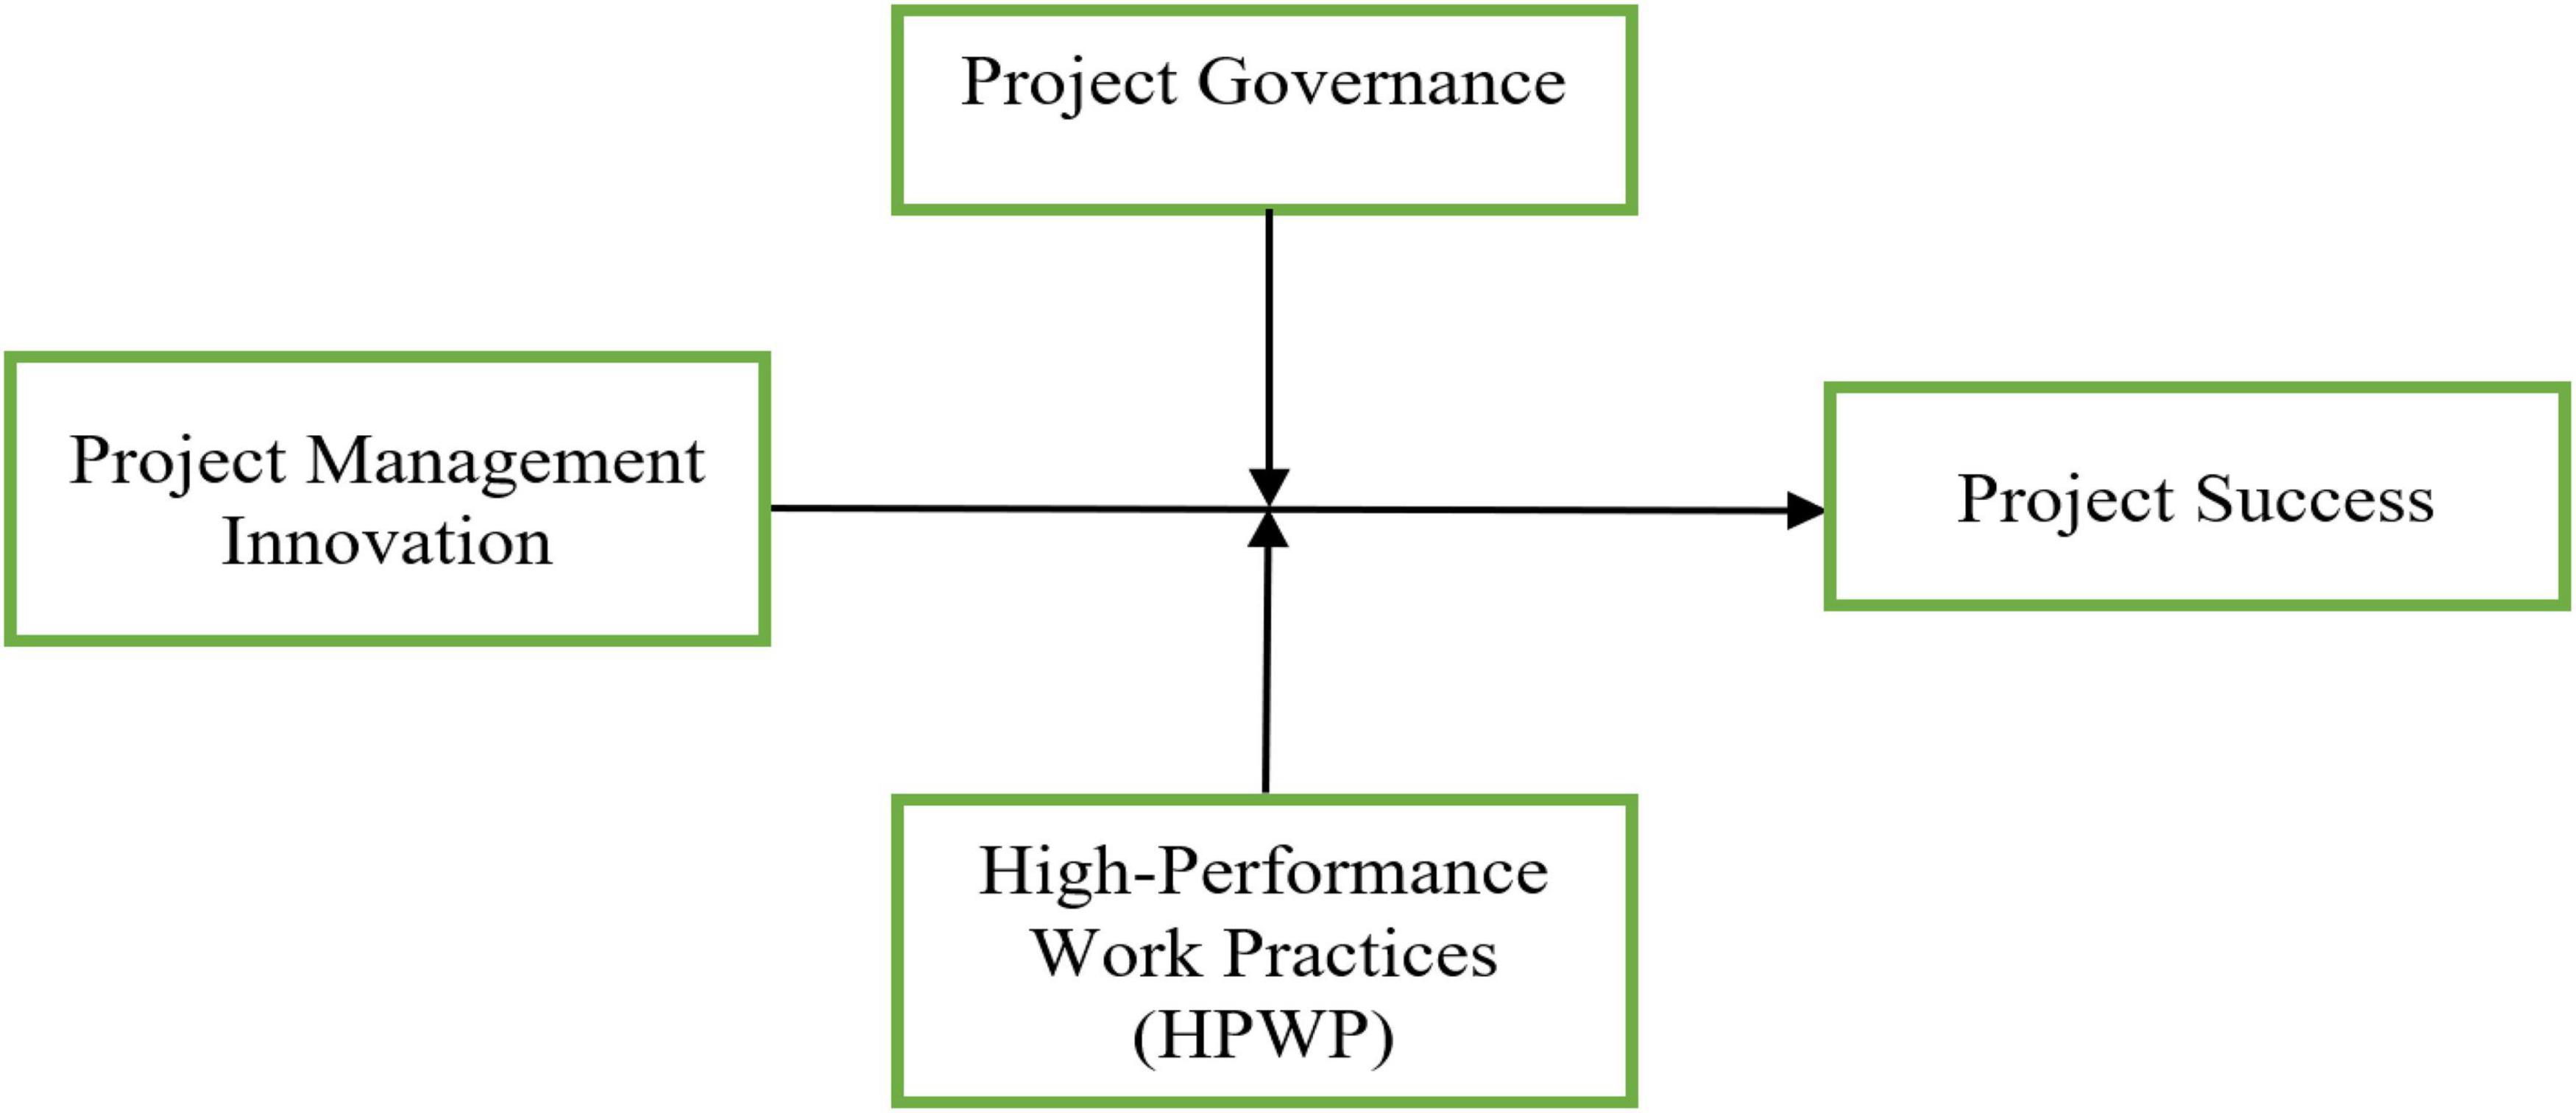 Linking “multi-dimensions” of relational governance and